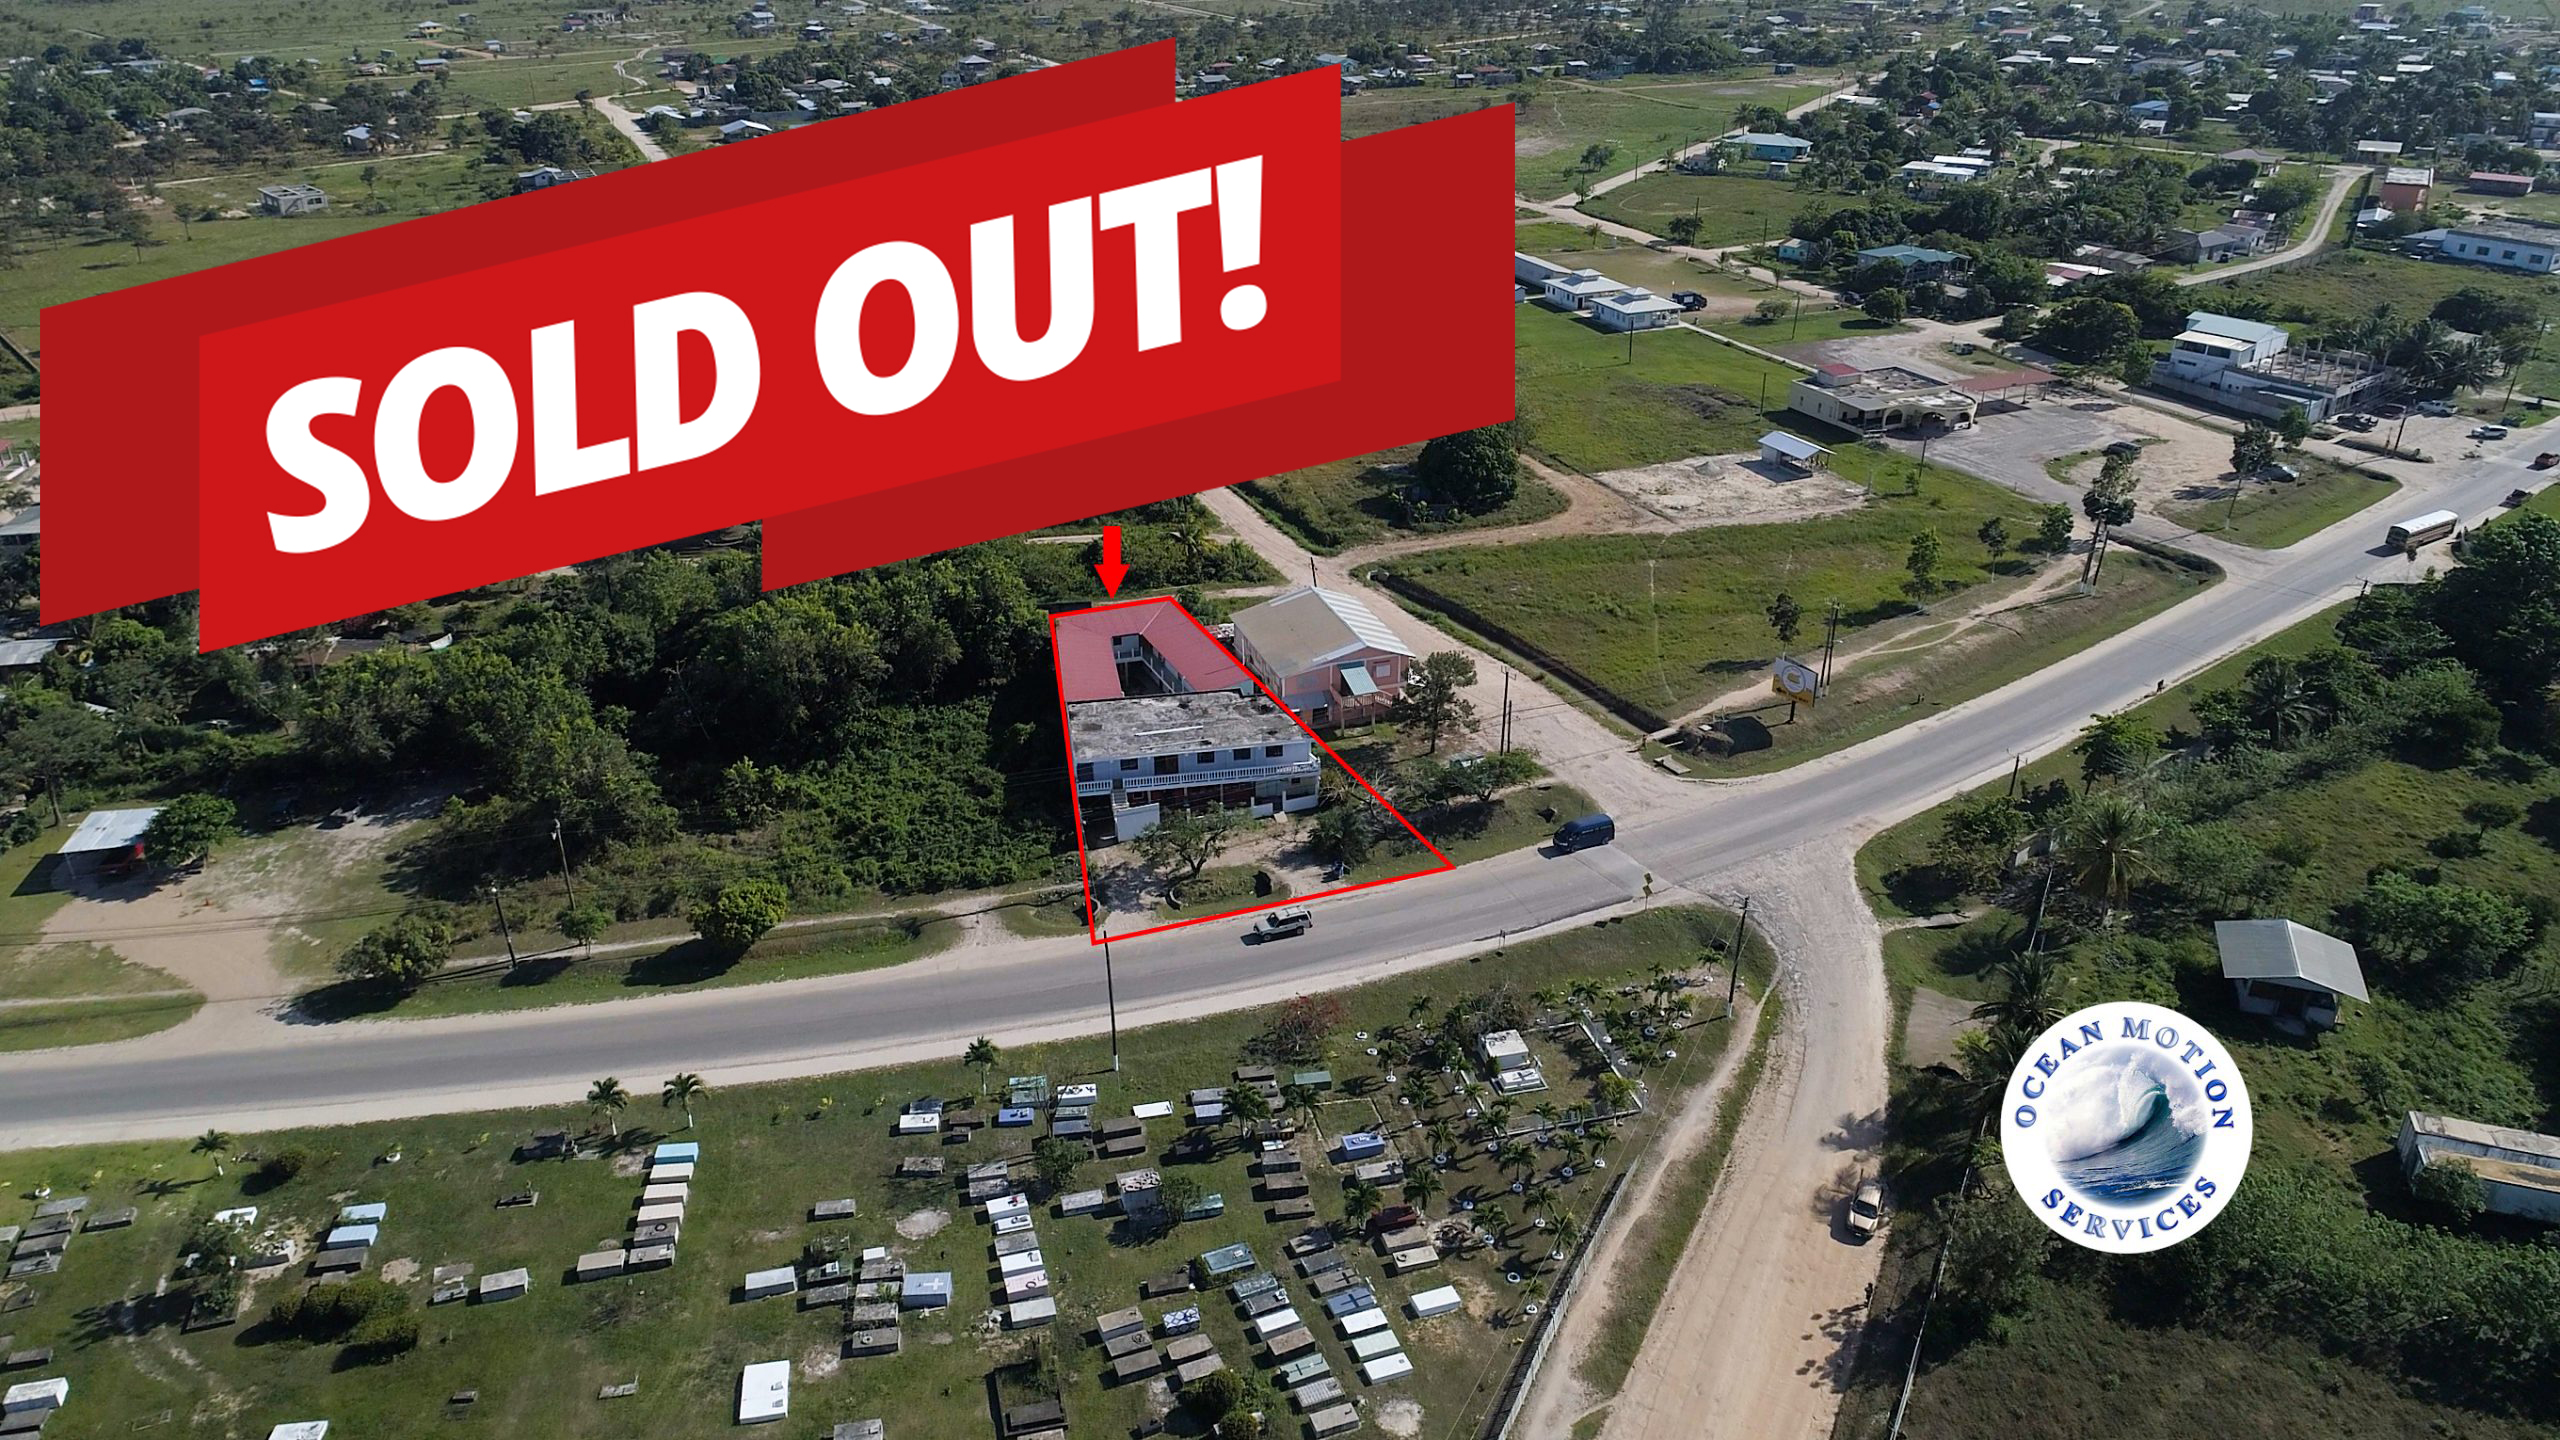 SOLD-HIV01-Commercial Property House & Land for Sale ,Independence Village, Stann Creek District           USD $600,000.00 or BZD $1.2million